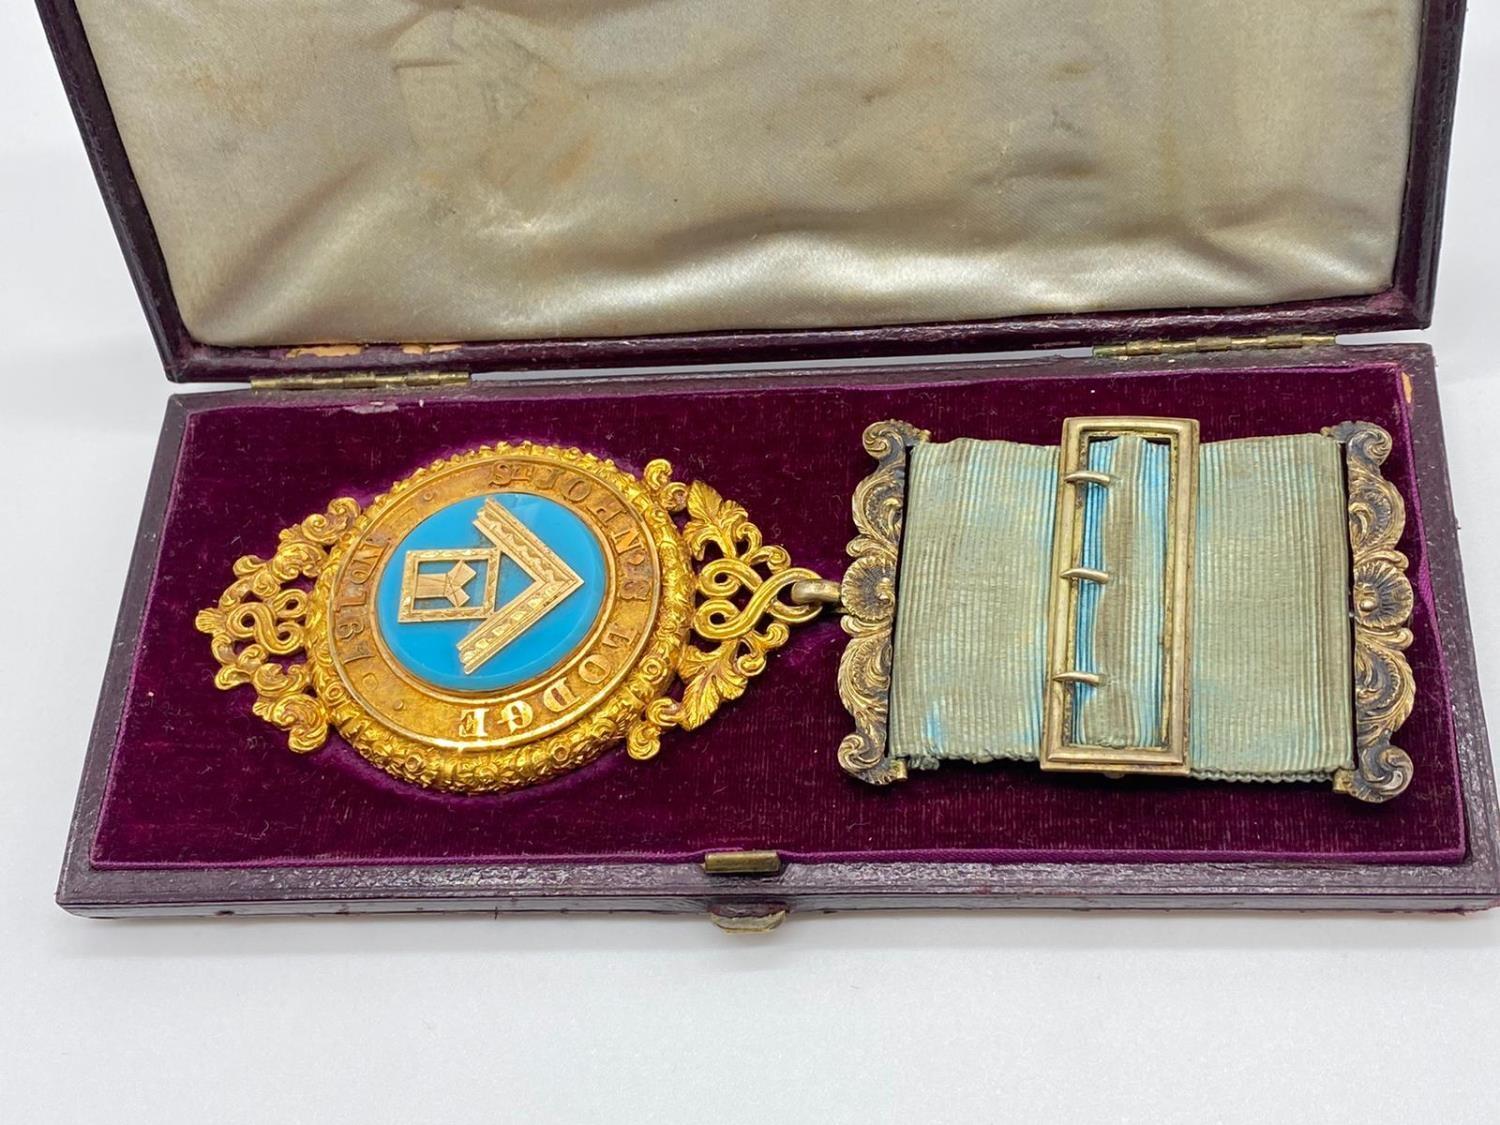 18ct gold Masonic jewel dated 1865 from the St's John lodge Hampstead number 167, weight 62.3g total - Image 4 of 8